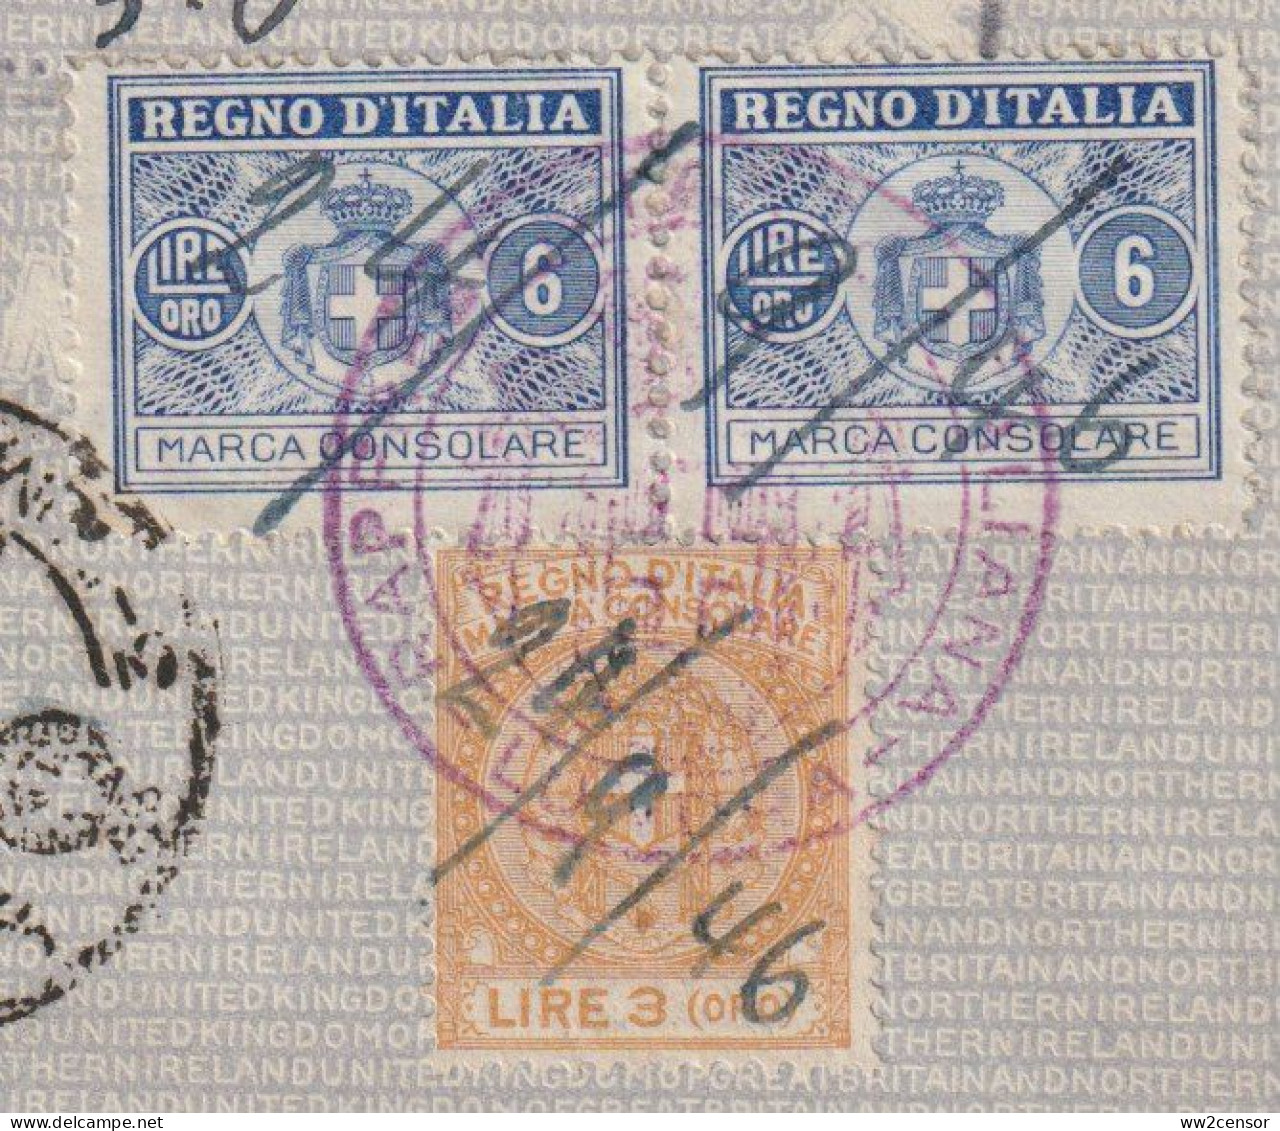 Italy 1946 - Italian Fiscal Revenue Stamps On A Visa On A Passport Page - Revenue Stamps